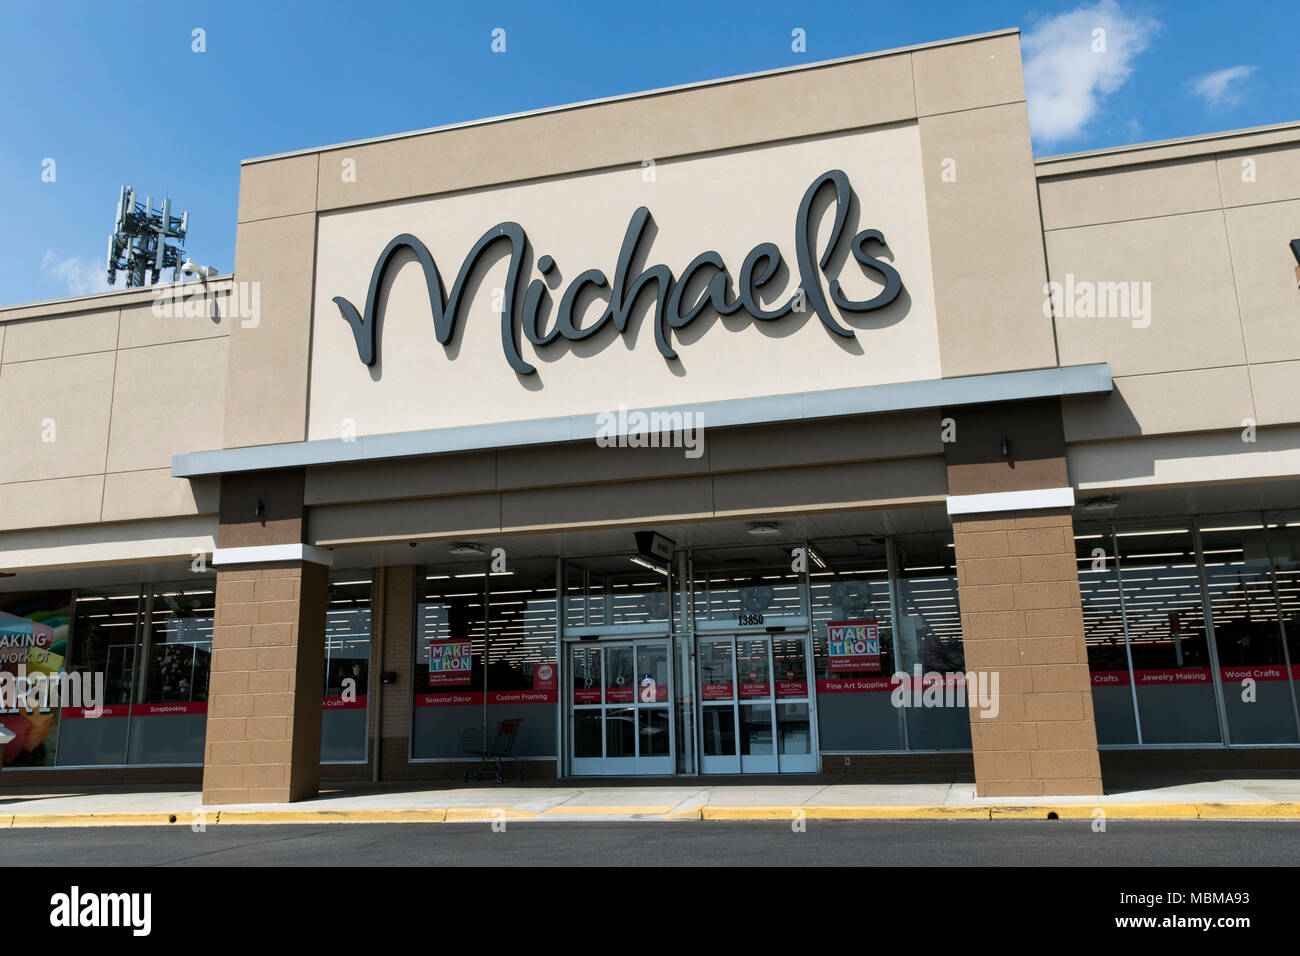 https://c8.alamy.com/comp/MBMA93/a-logo-sign-outside-of-a-michaels-retail-store-location-in-silver-spring-maryland-on-april-10-2018-MBMA93.jpg